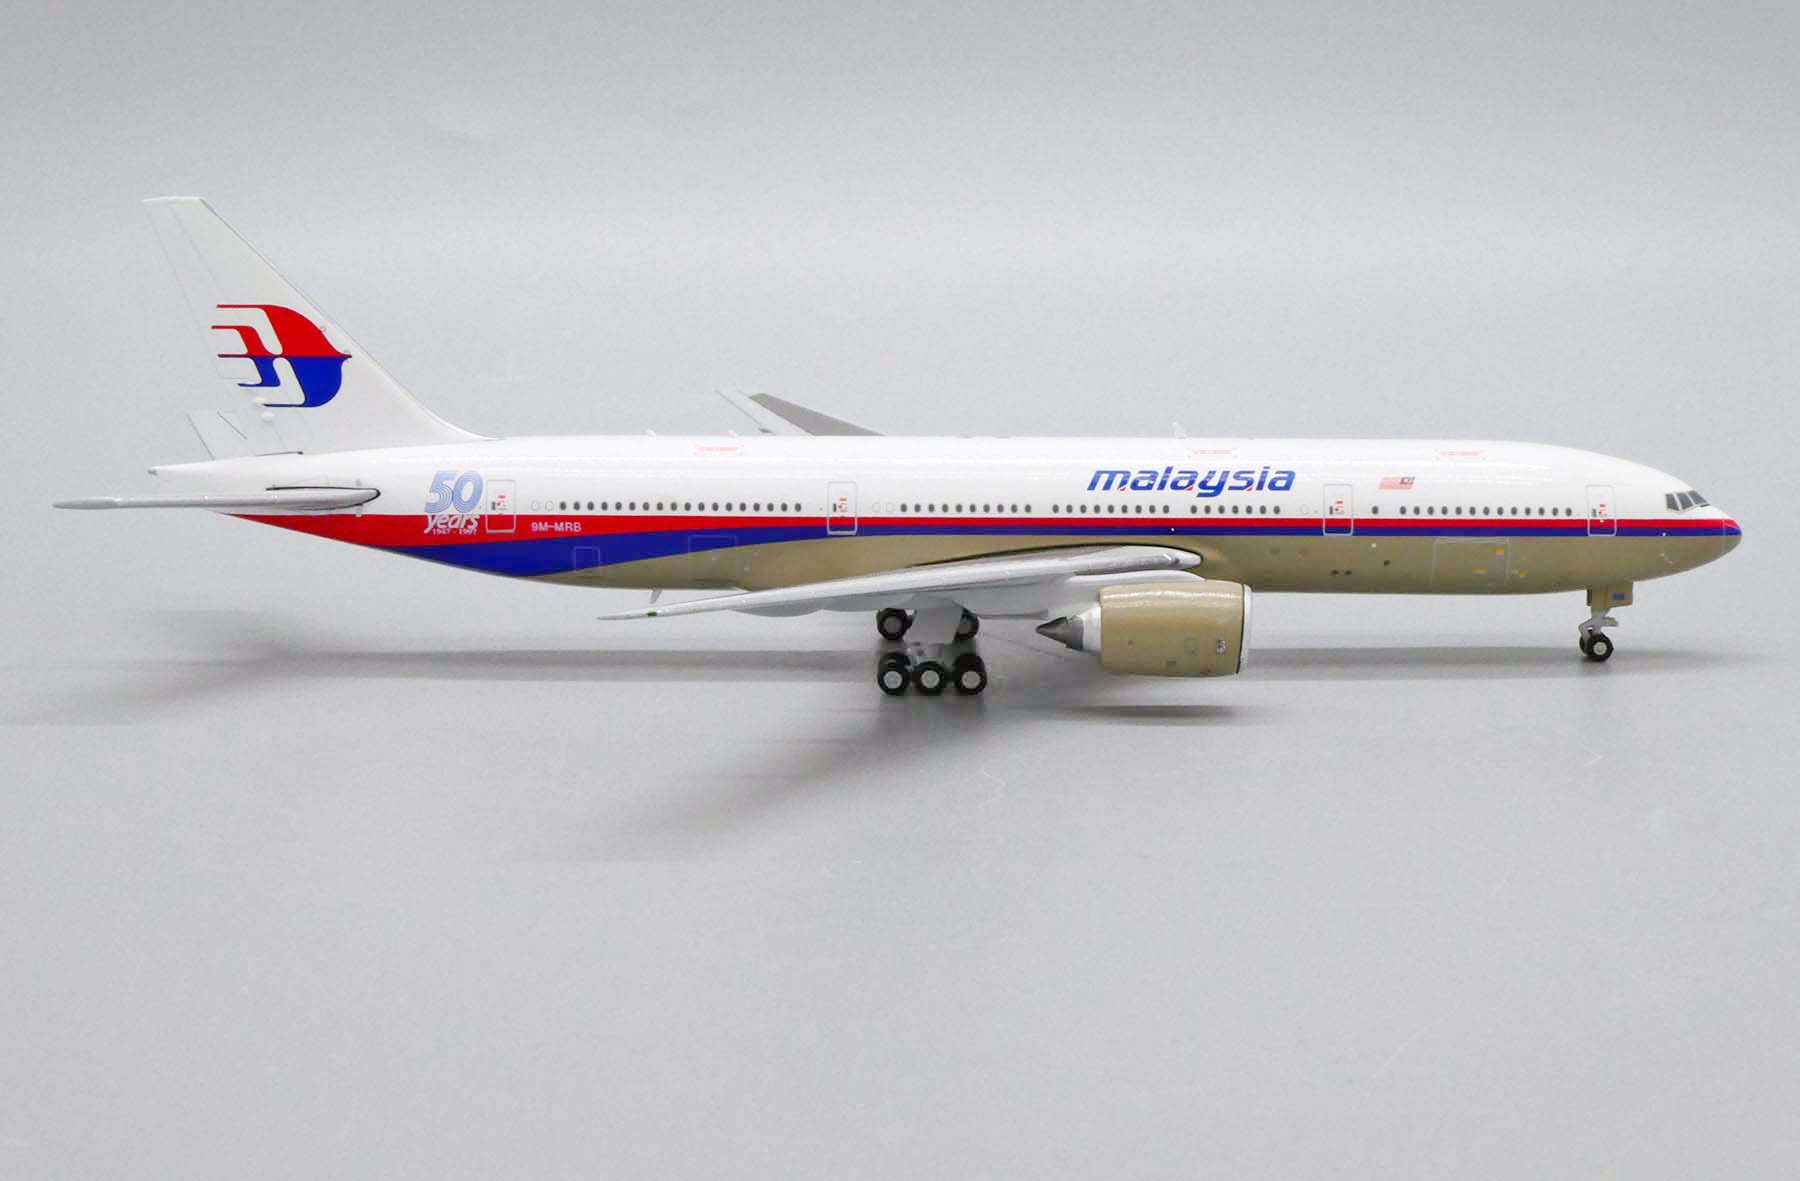 ScaleModelStore.com :: JC Wings 1:400 - XX4488 - Malaysia Airlines